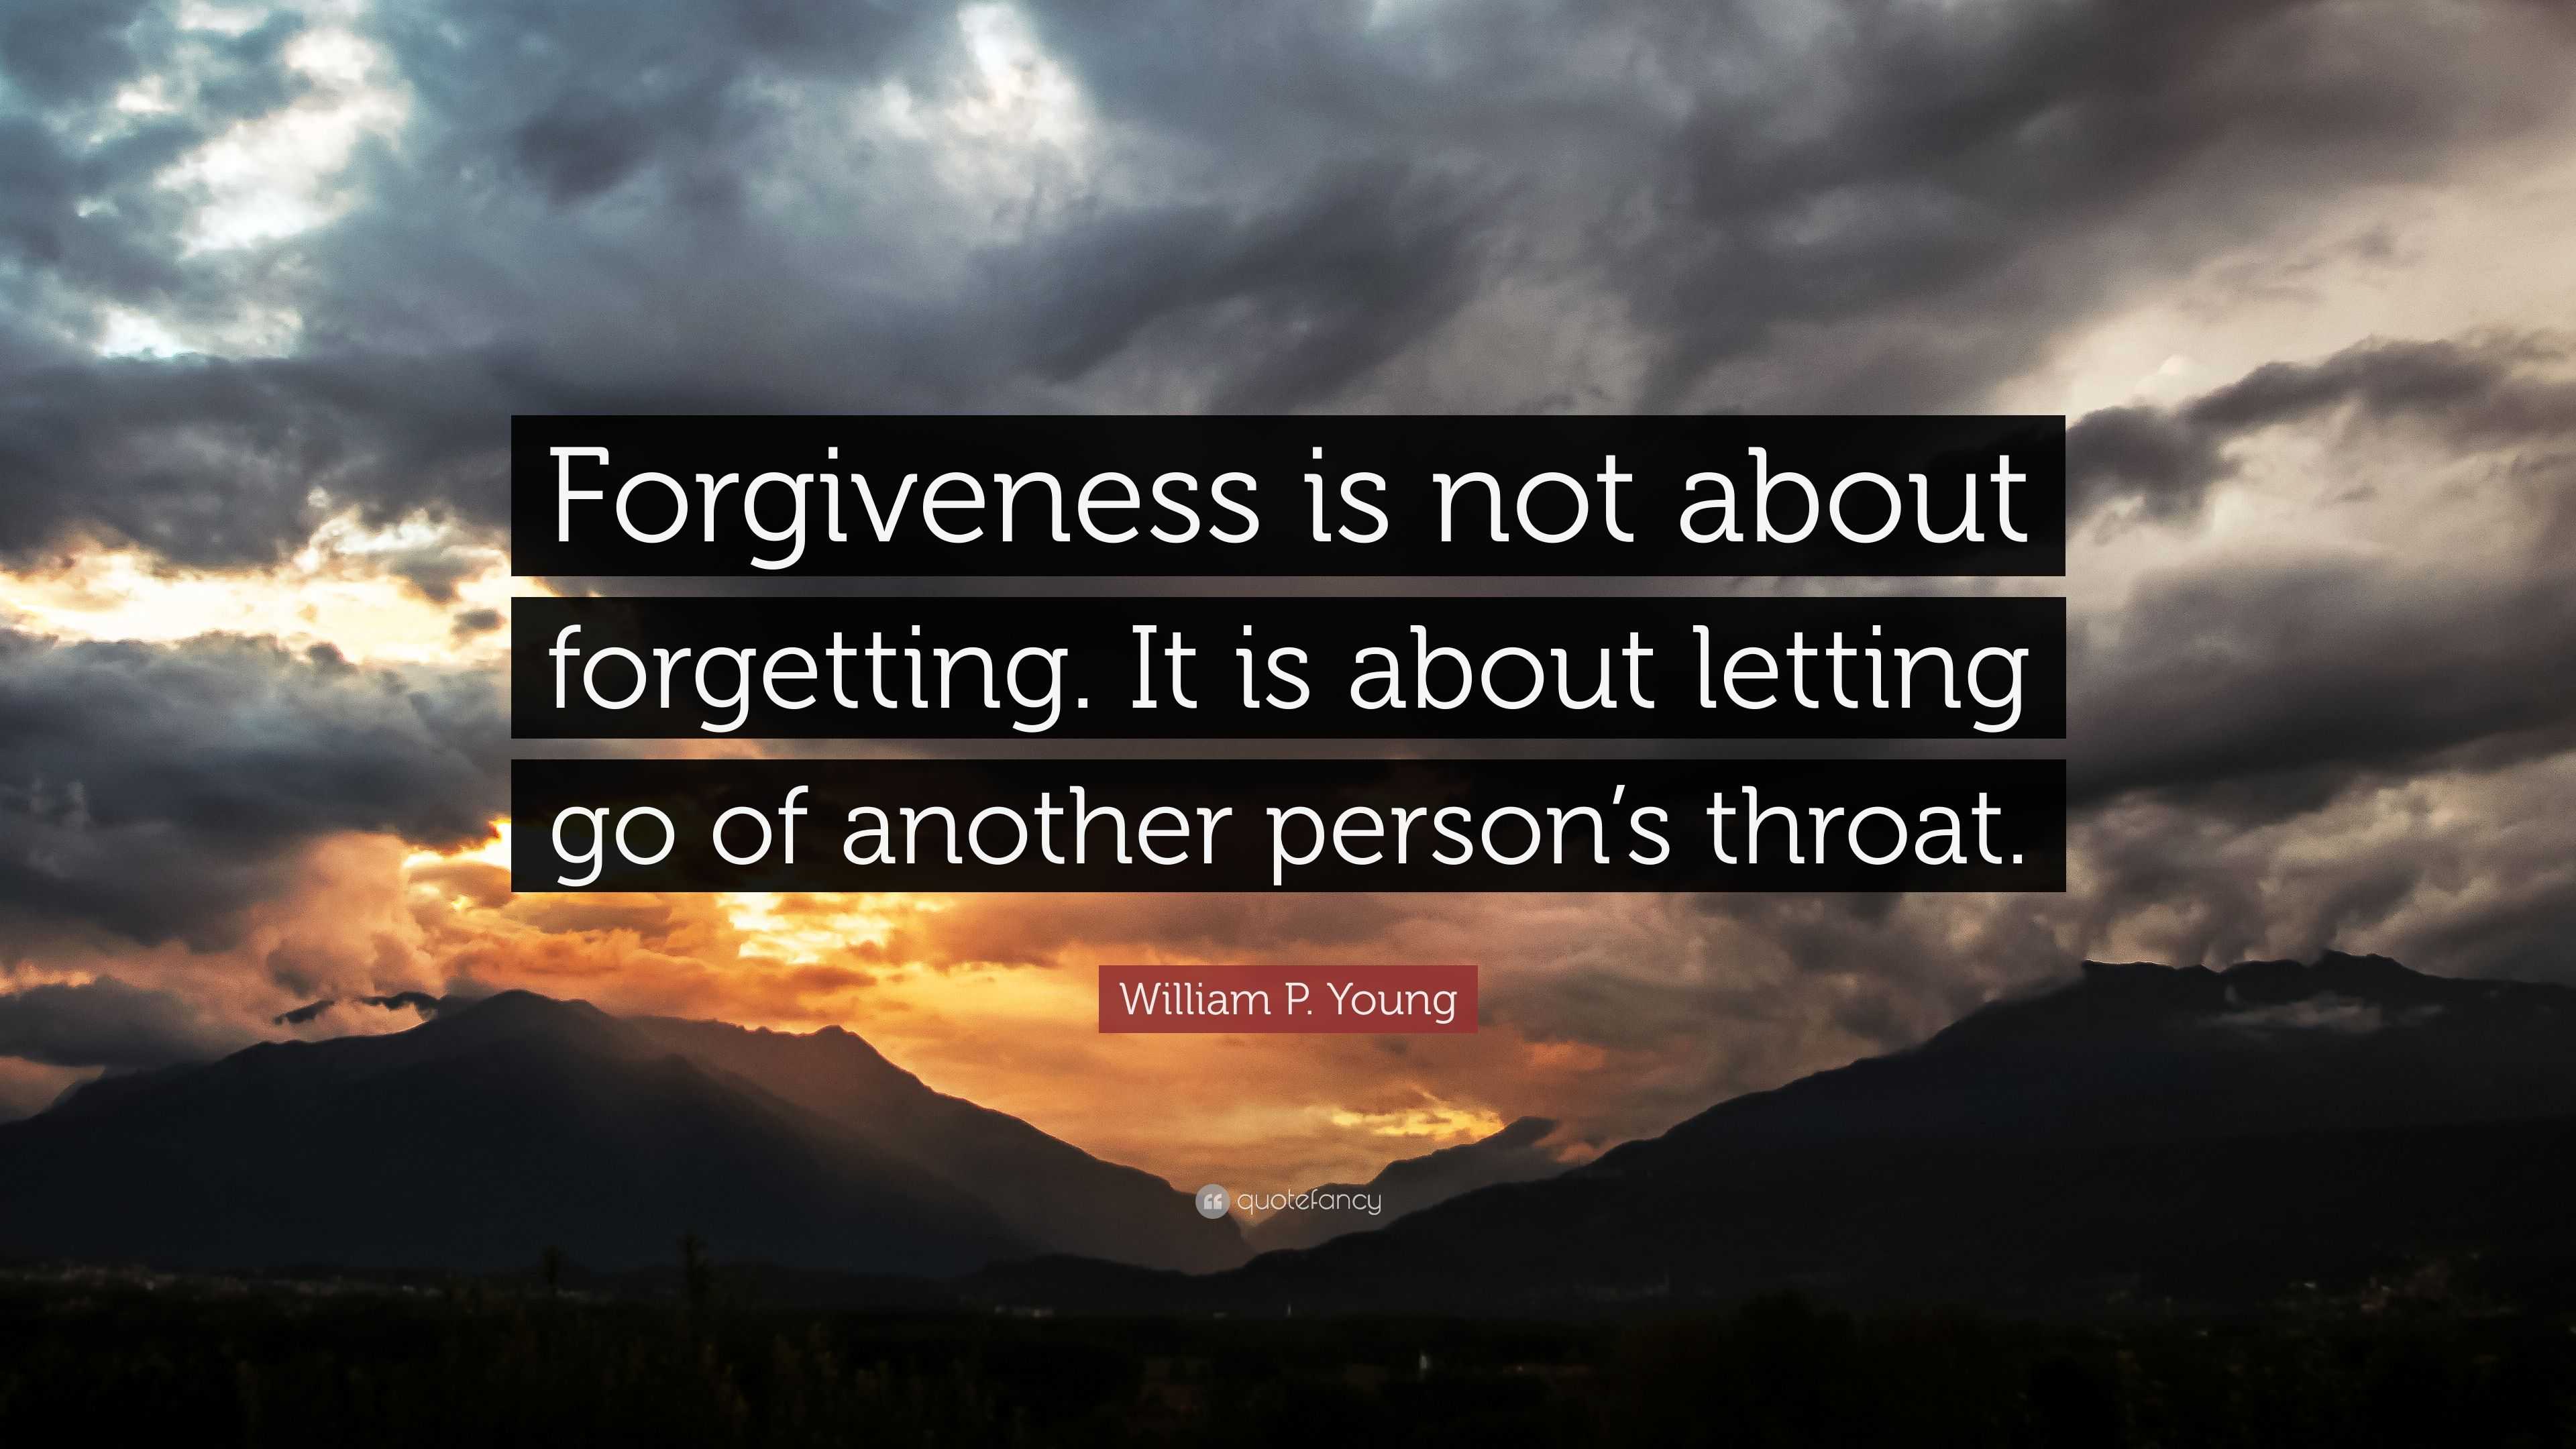 William P. Young Quote: “Forgiveness is not about forgetting. It is ...